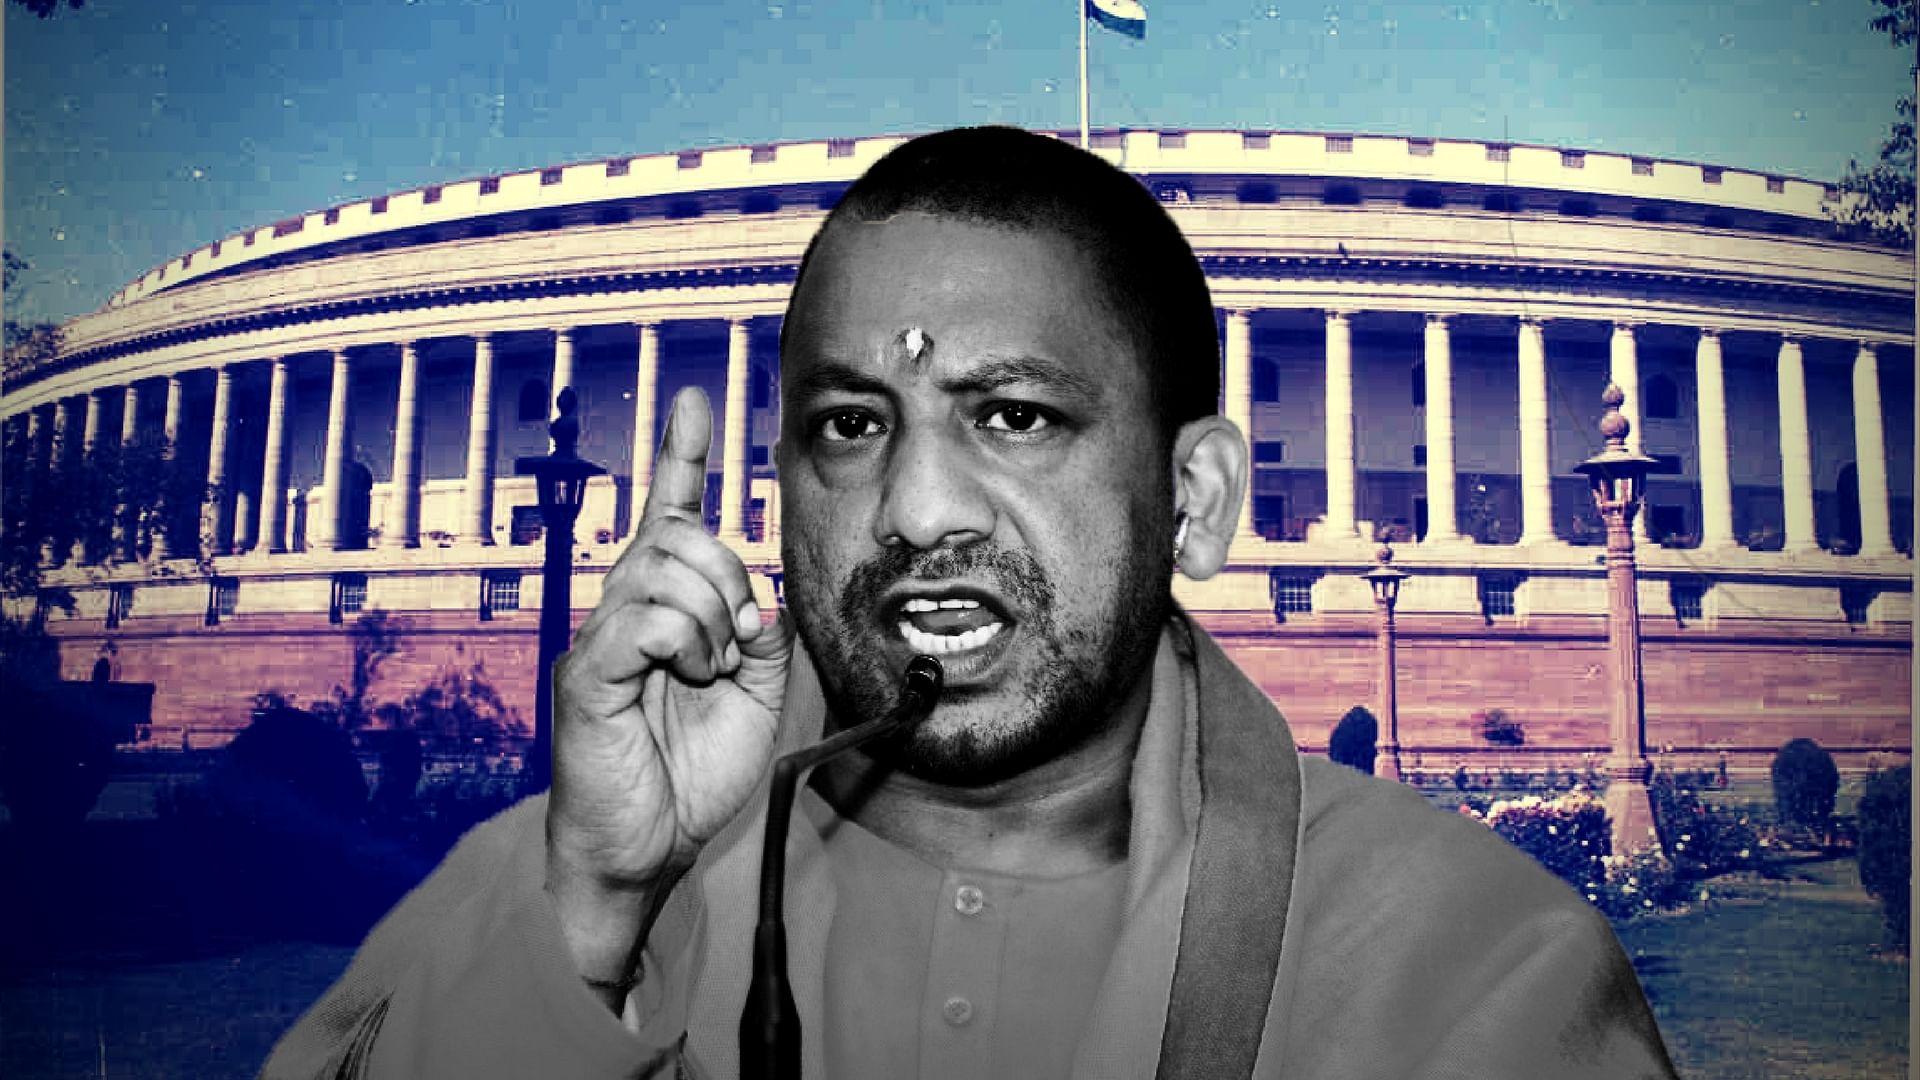 In the current Lok Sabha, 18 percent of Yogi Adityanath’s debates were focussed on Hindu issues like cow slaughter and protection of Hindu pilgrims. (Photo: Altered by <b>The Quint</b>)